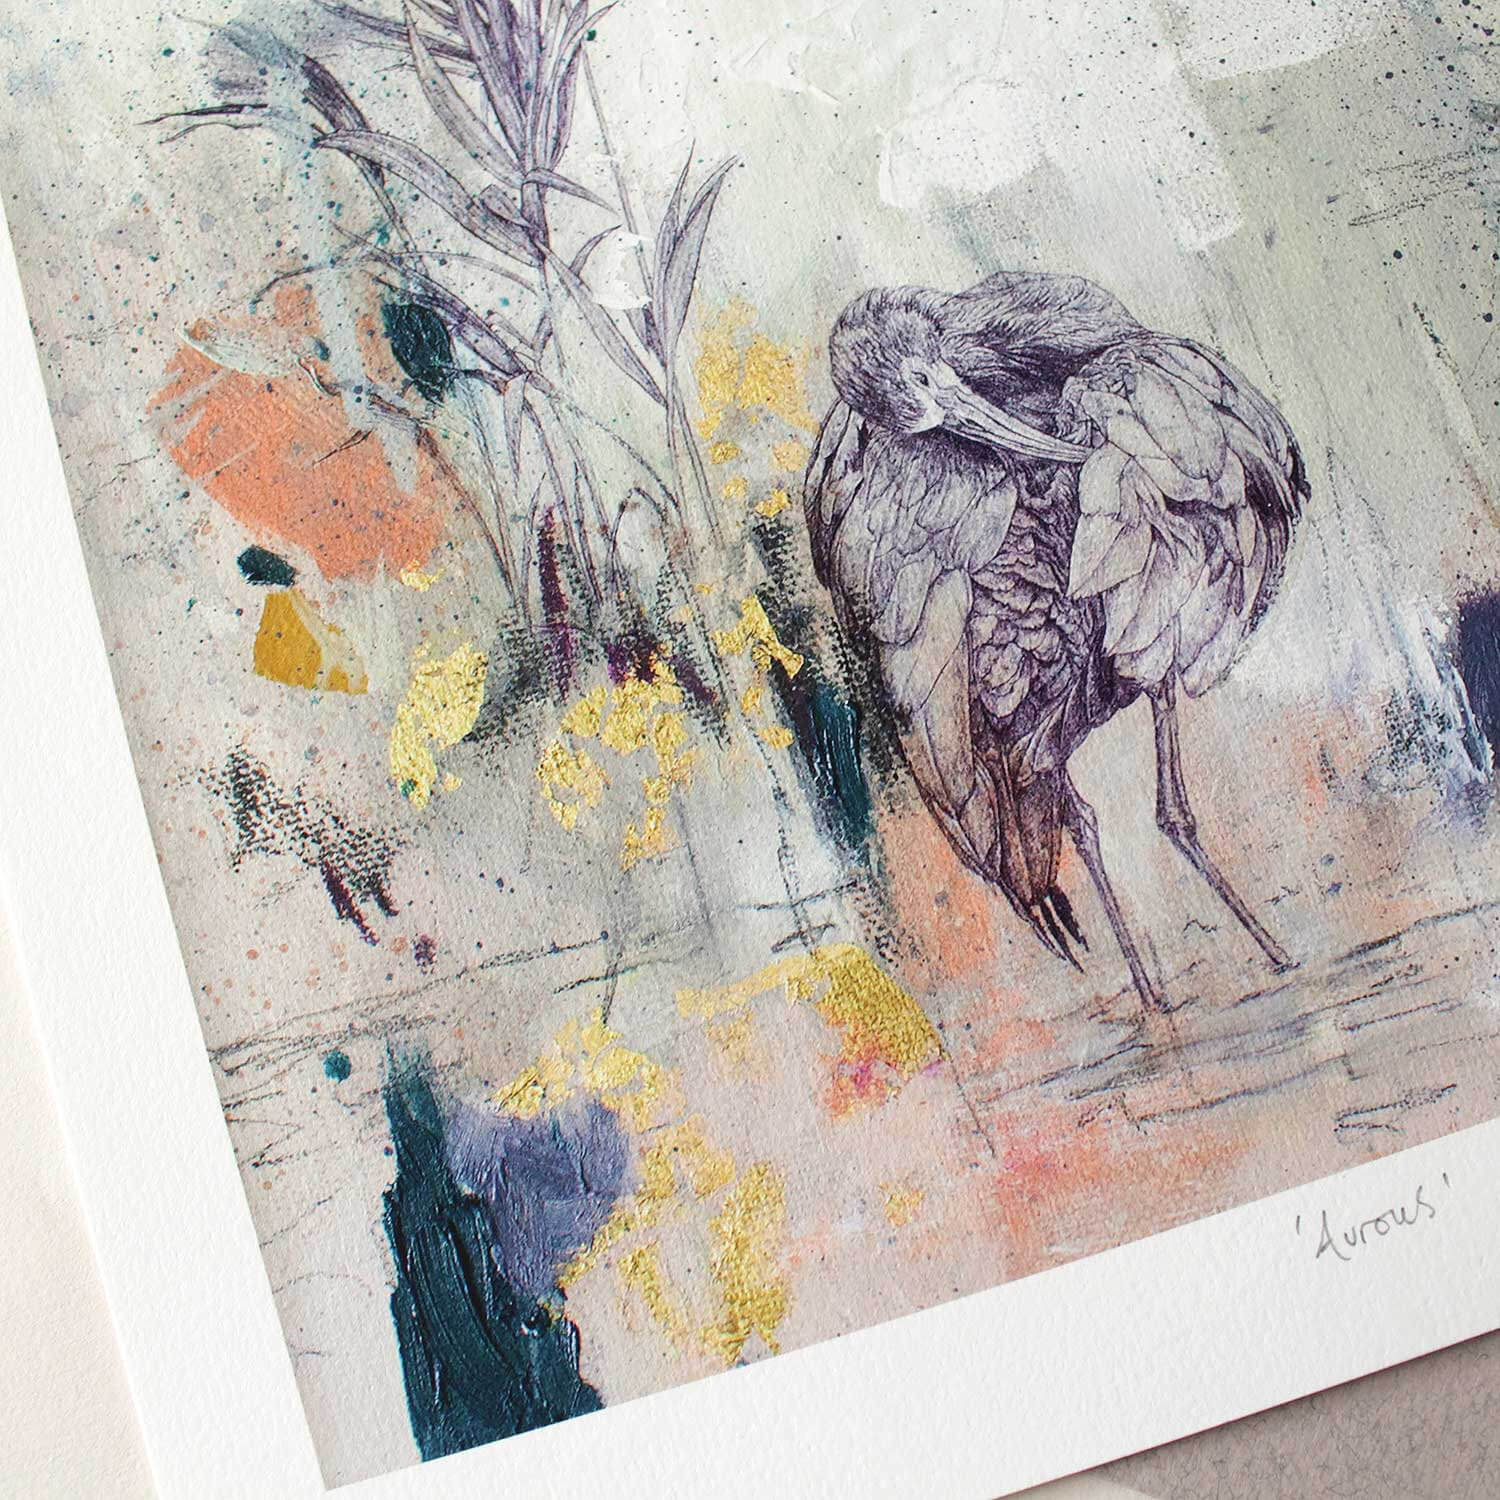 Limited Edition Giclee Print - Aurous